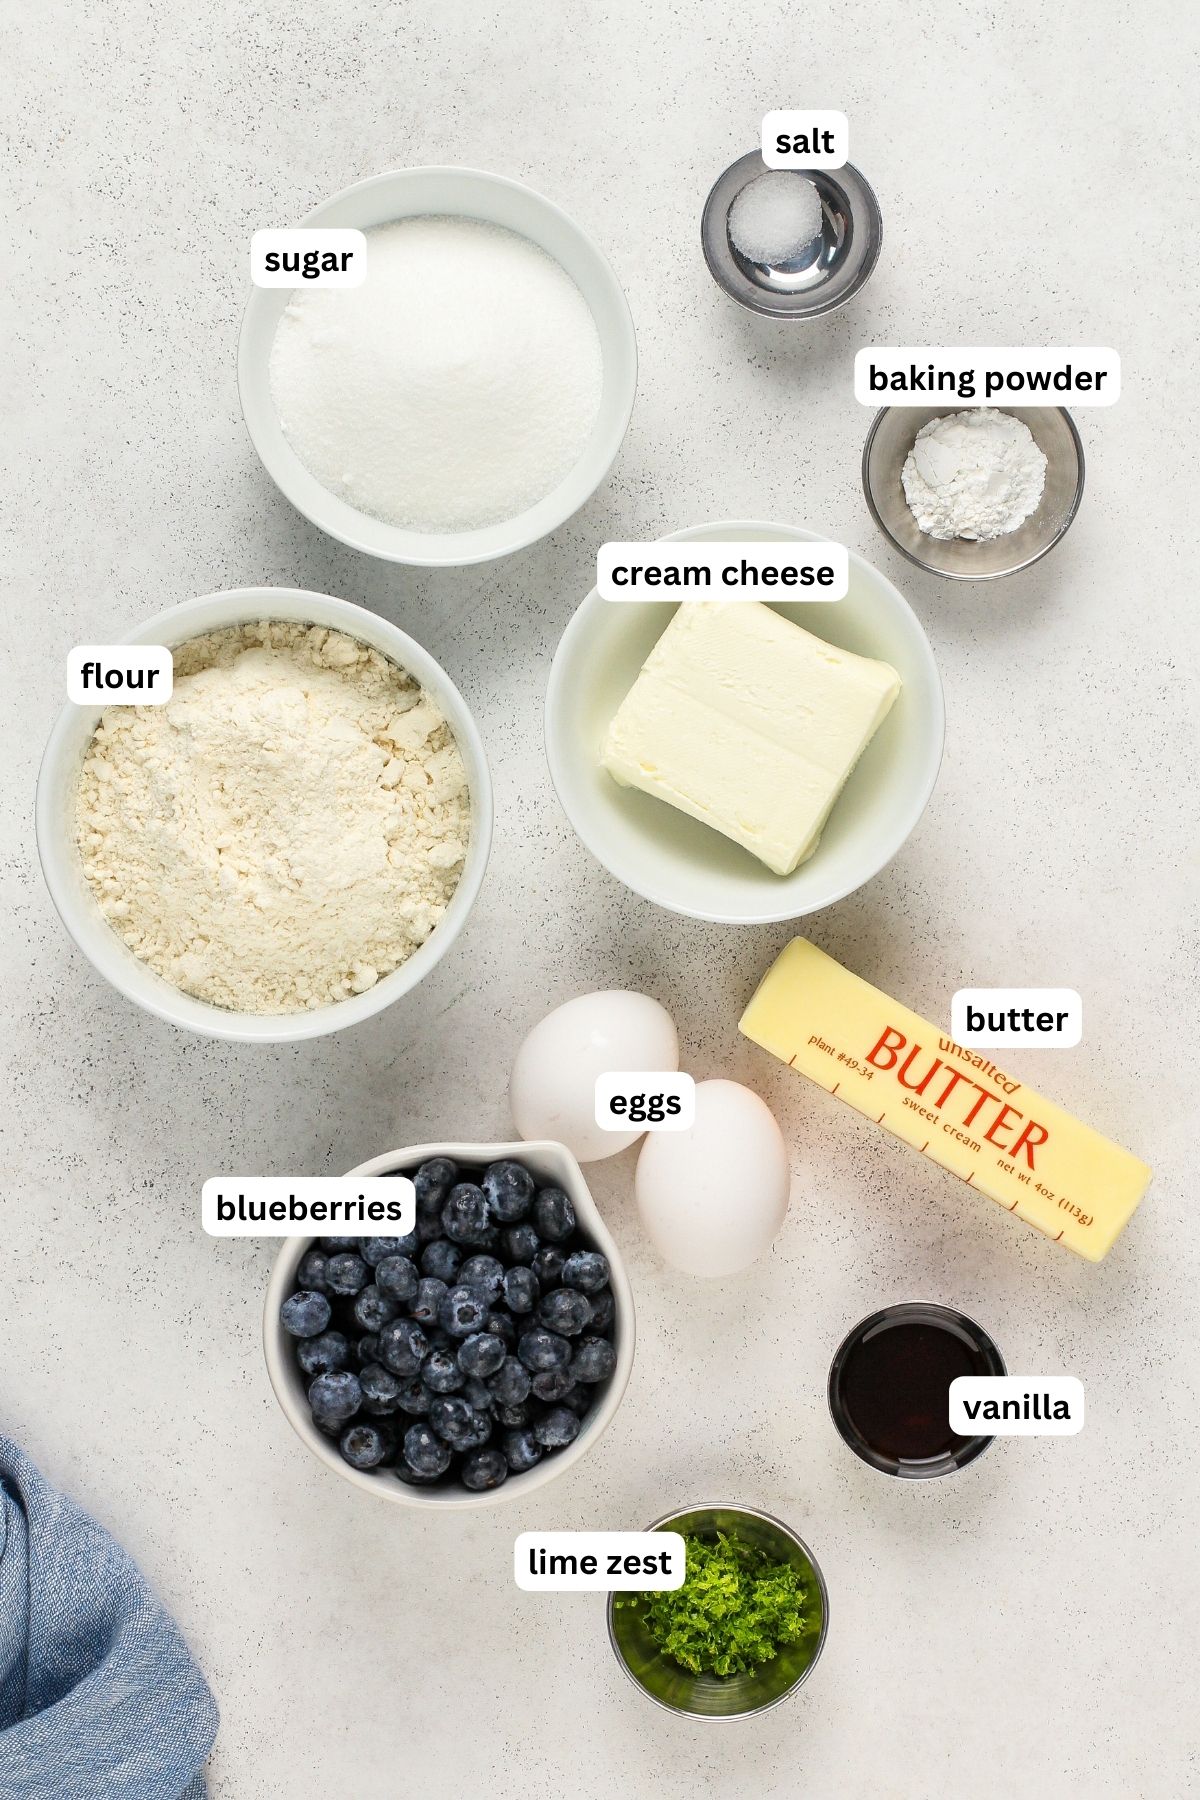 Ingredients for blueberry pound cake recipe arranged in bowls, from top to bottom: salt, sugar, baking powder, cream cheese, flour, butter, eggs, blueberries, vanilla and lime zest.